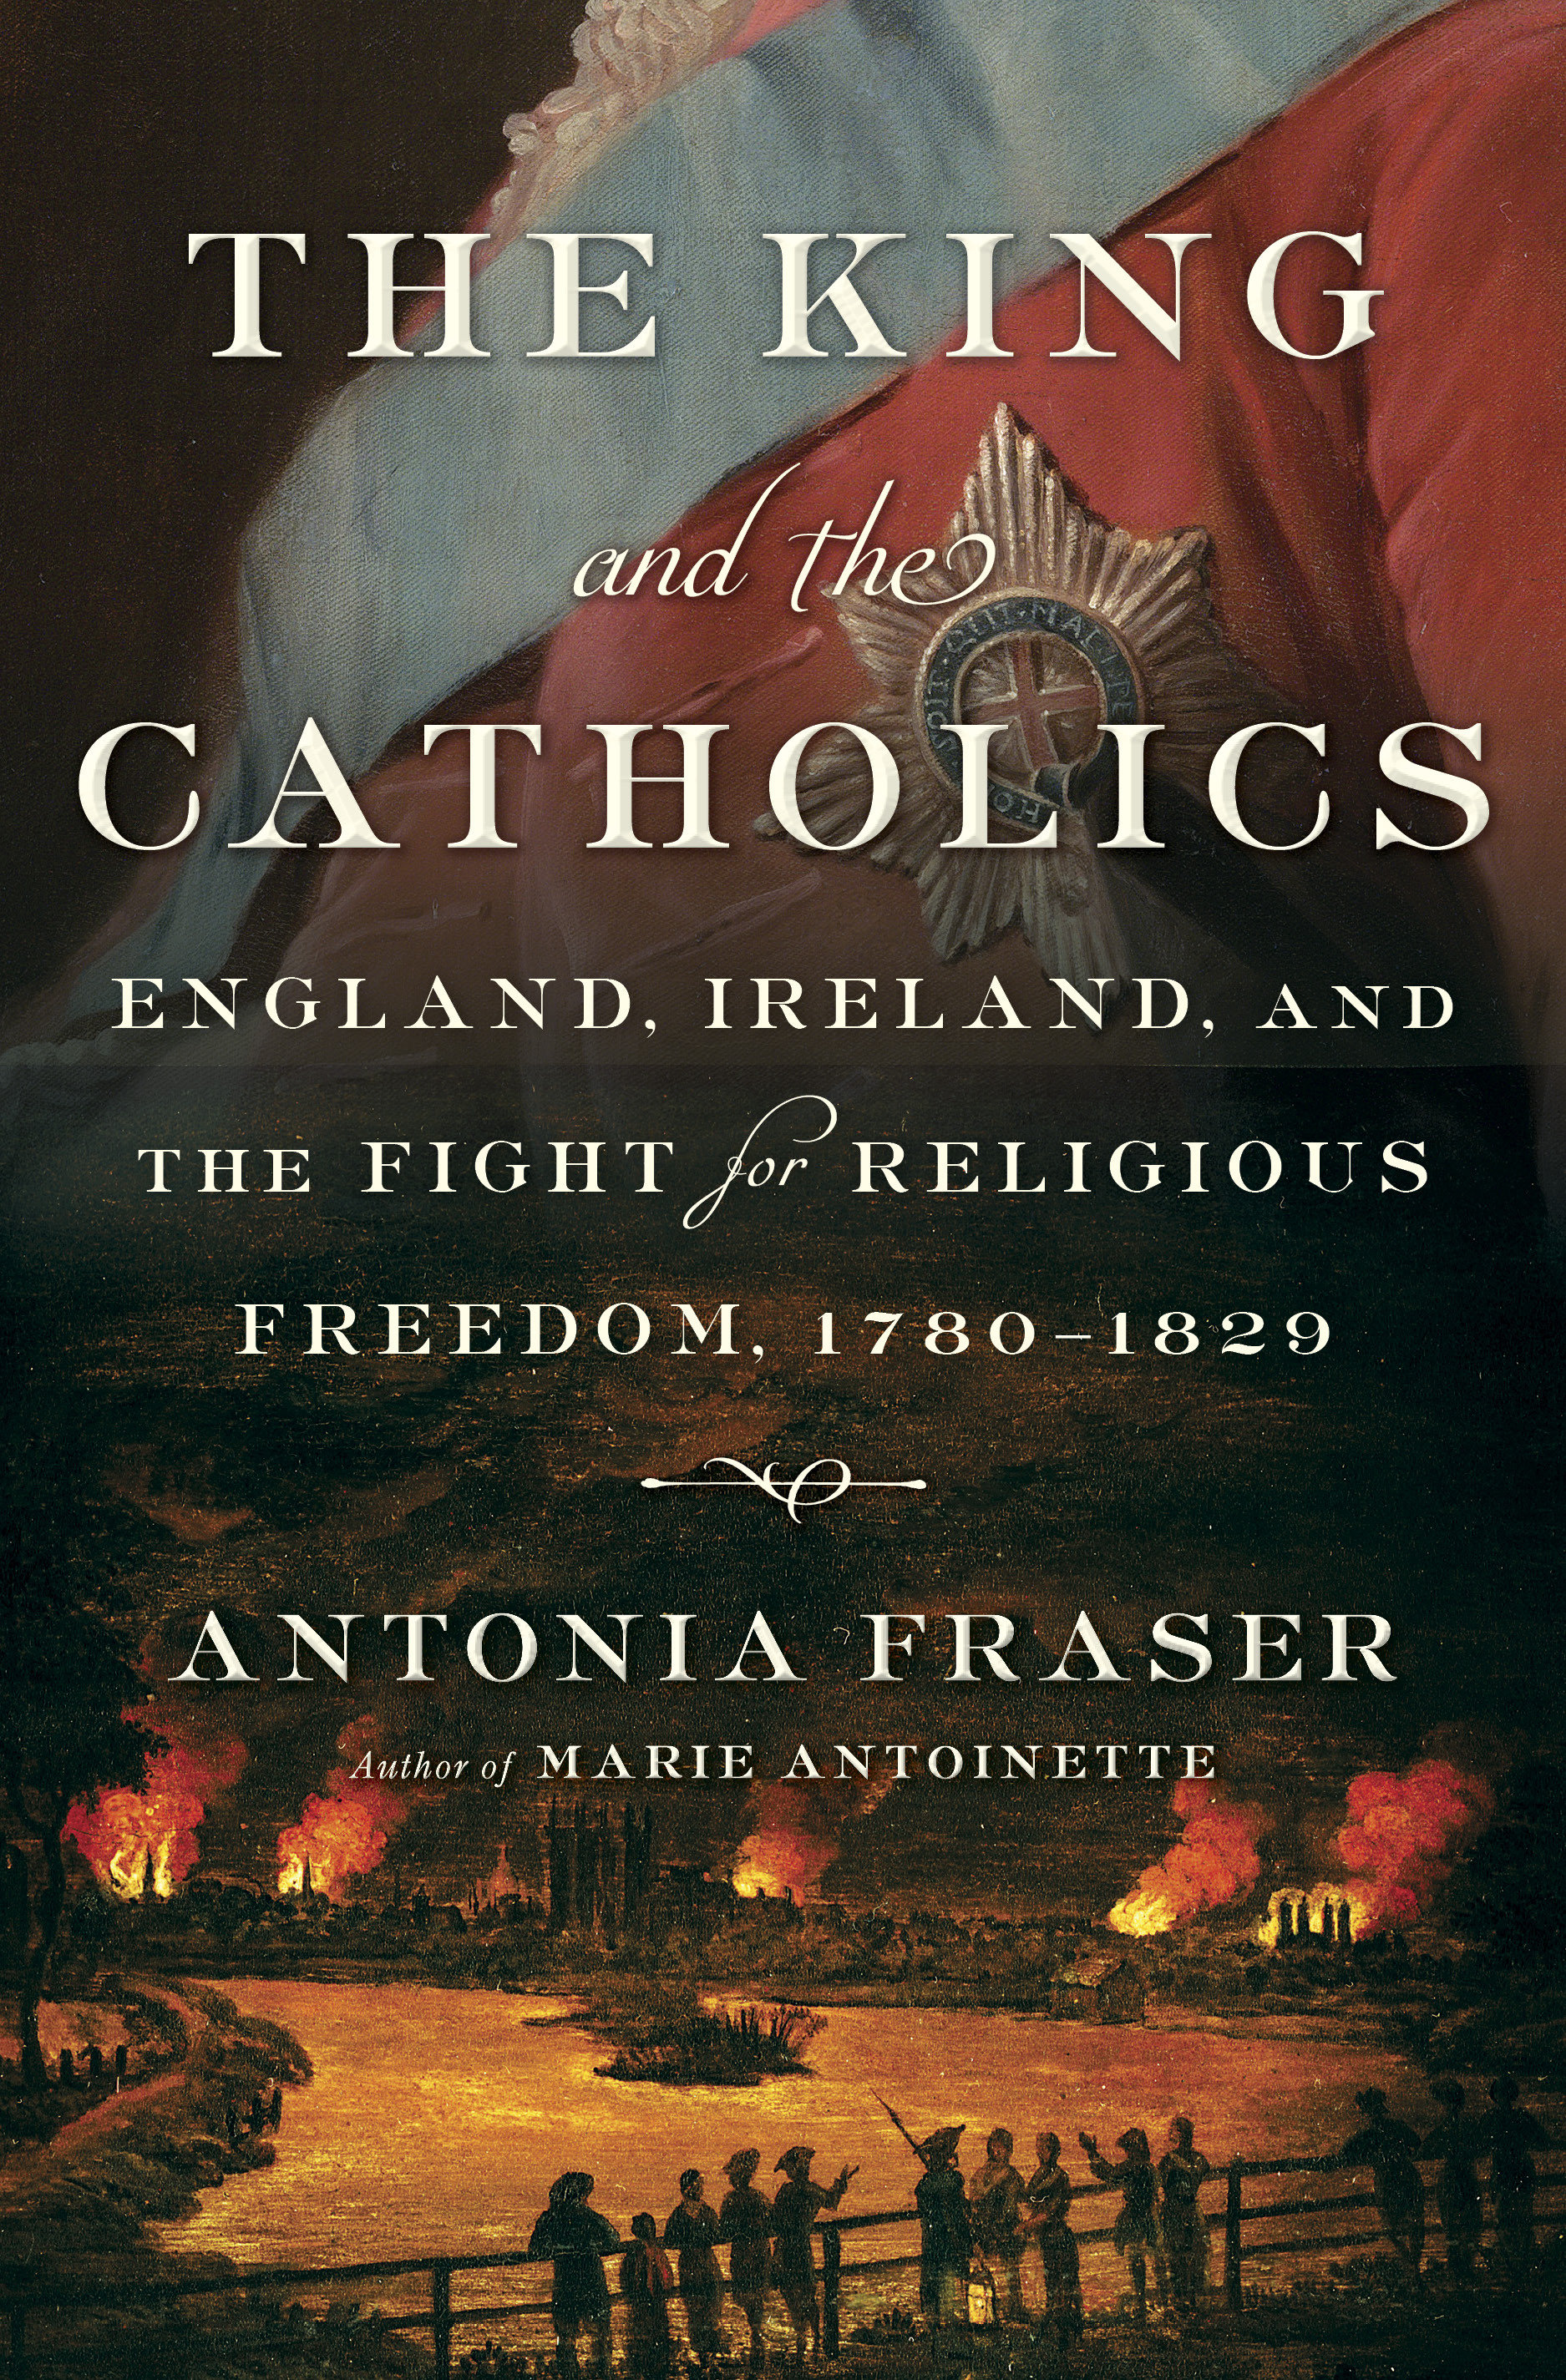 The King and the Catholic cover image